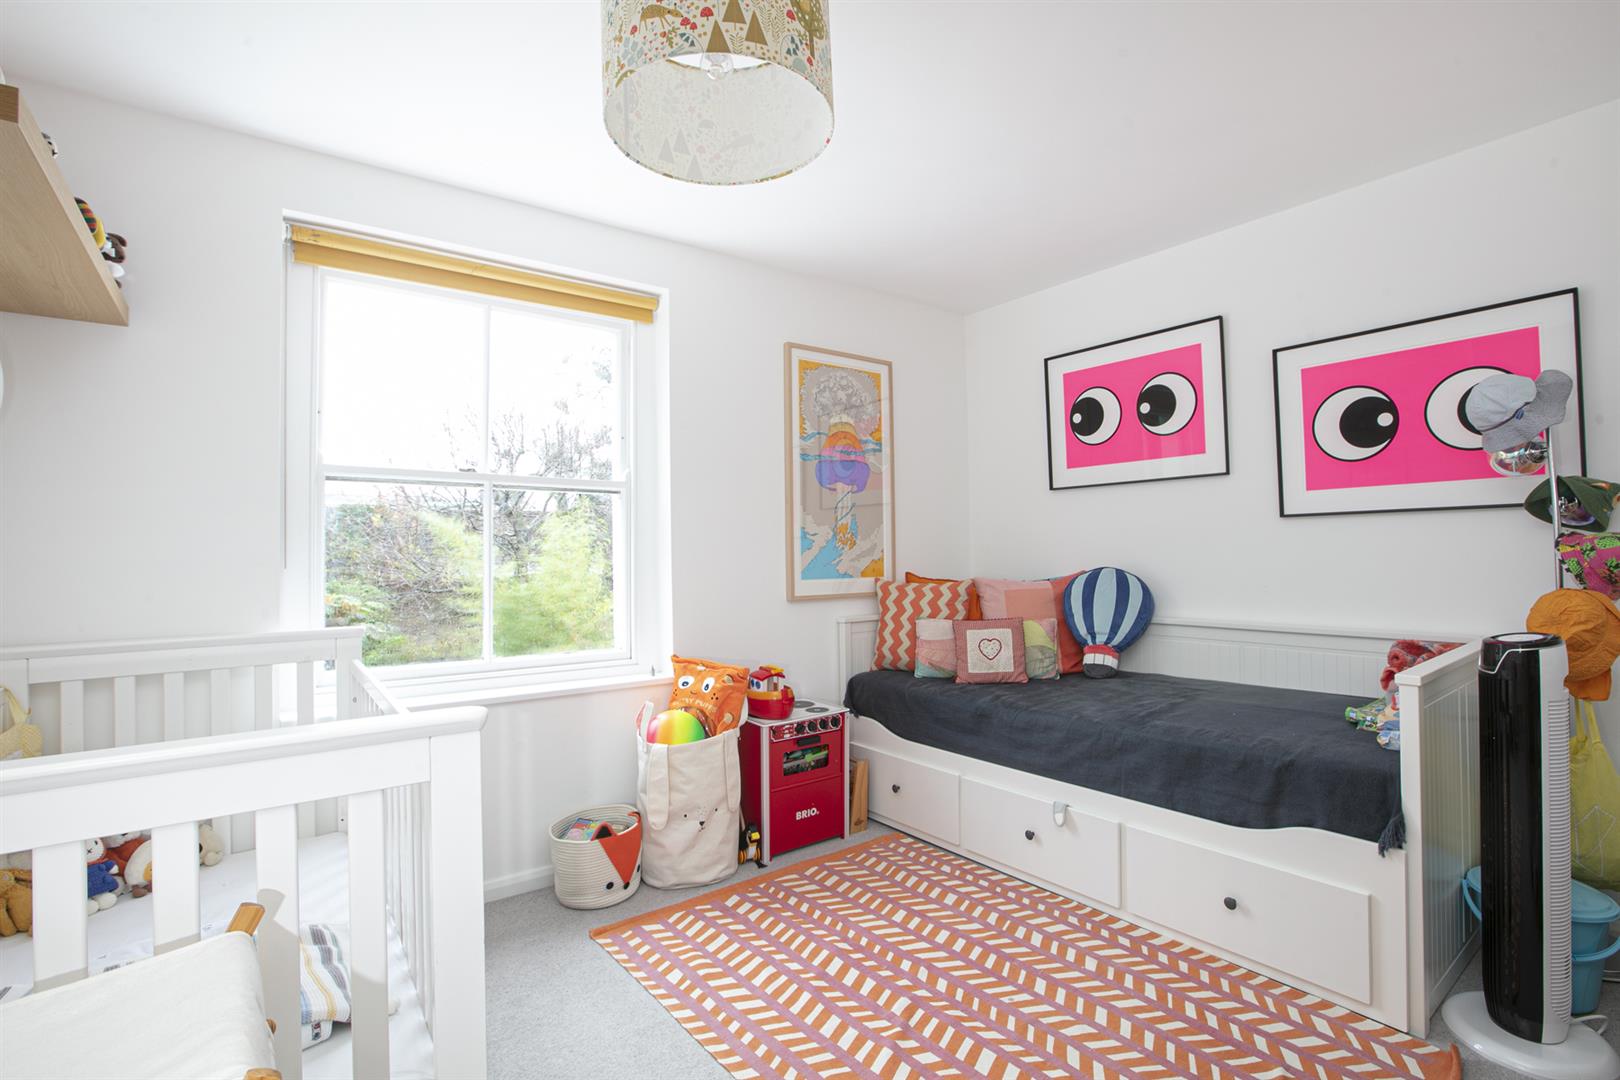 Flat - Conversion For Sale in Holly Grove, Peckham, SE15 893 view17